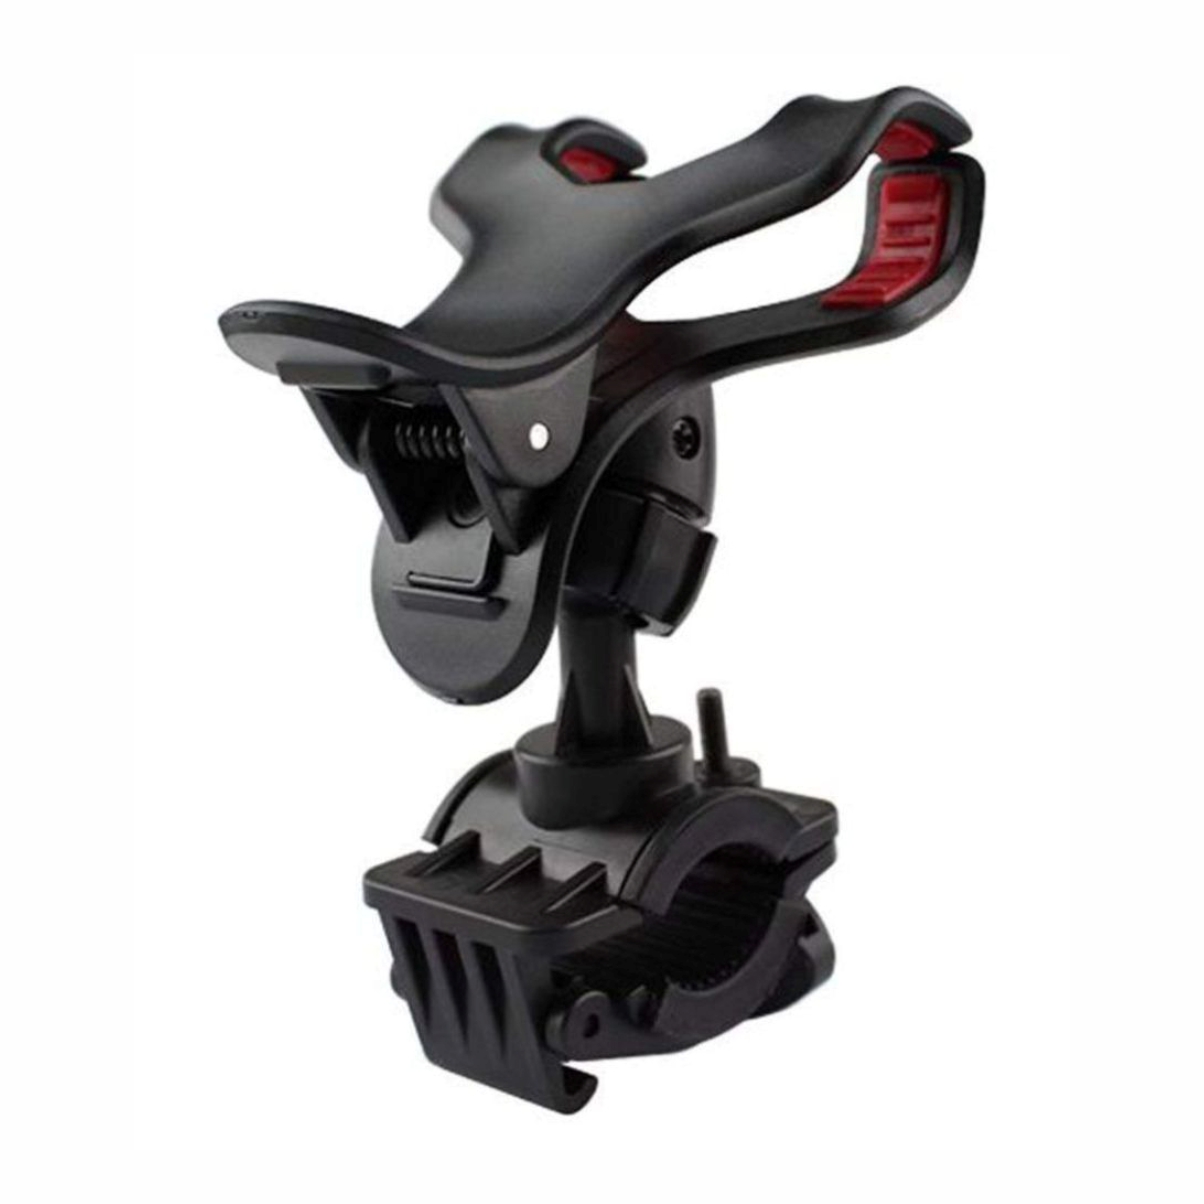 Stealth Black Bike Mobile Holder, Secure and Stylish Cycling Companion